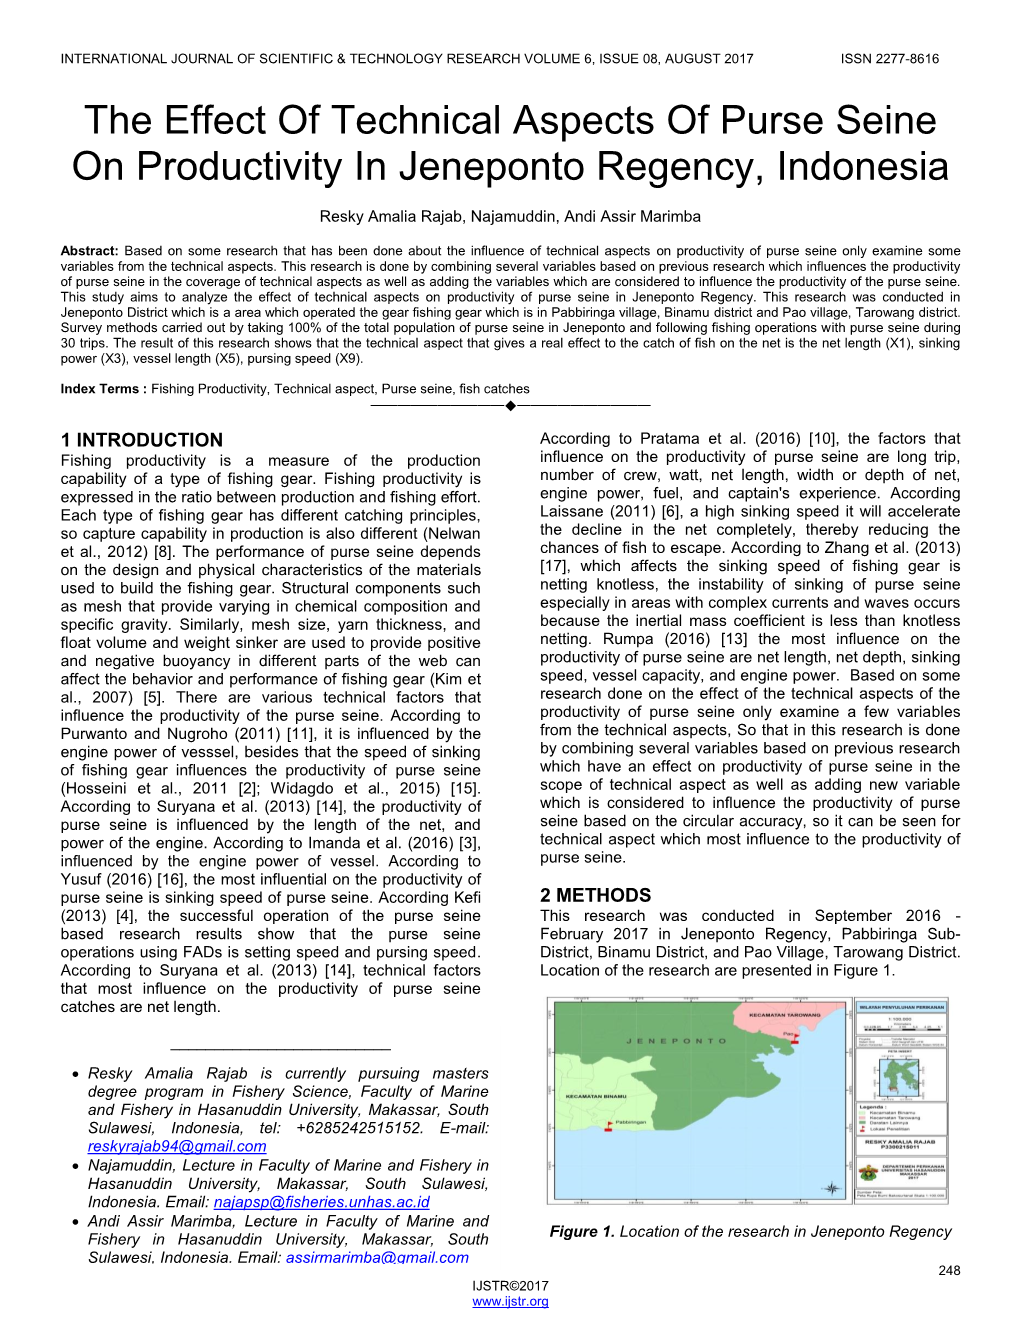 The Effect of Technical Aspects of Purse Seine on Productivity in Jeneponto Regency, Indonesia